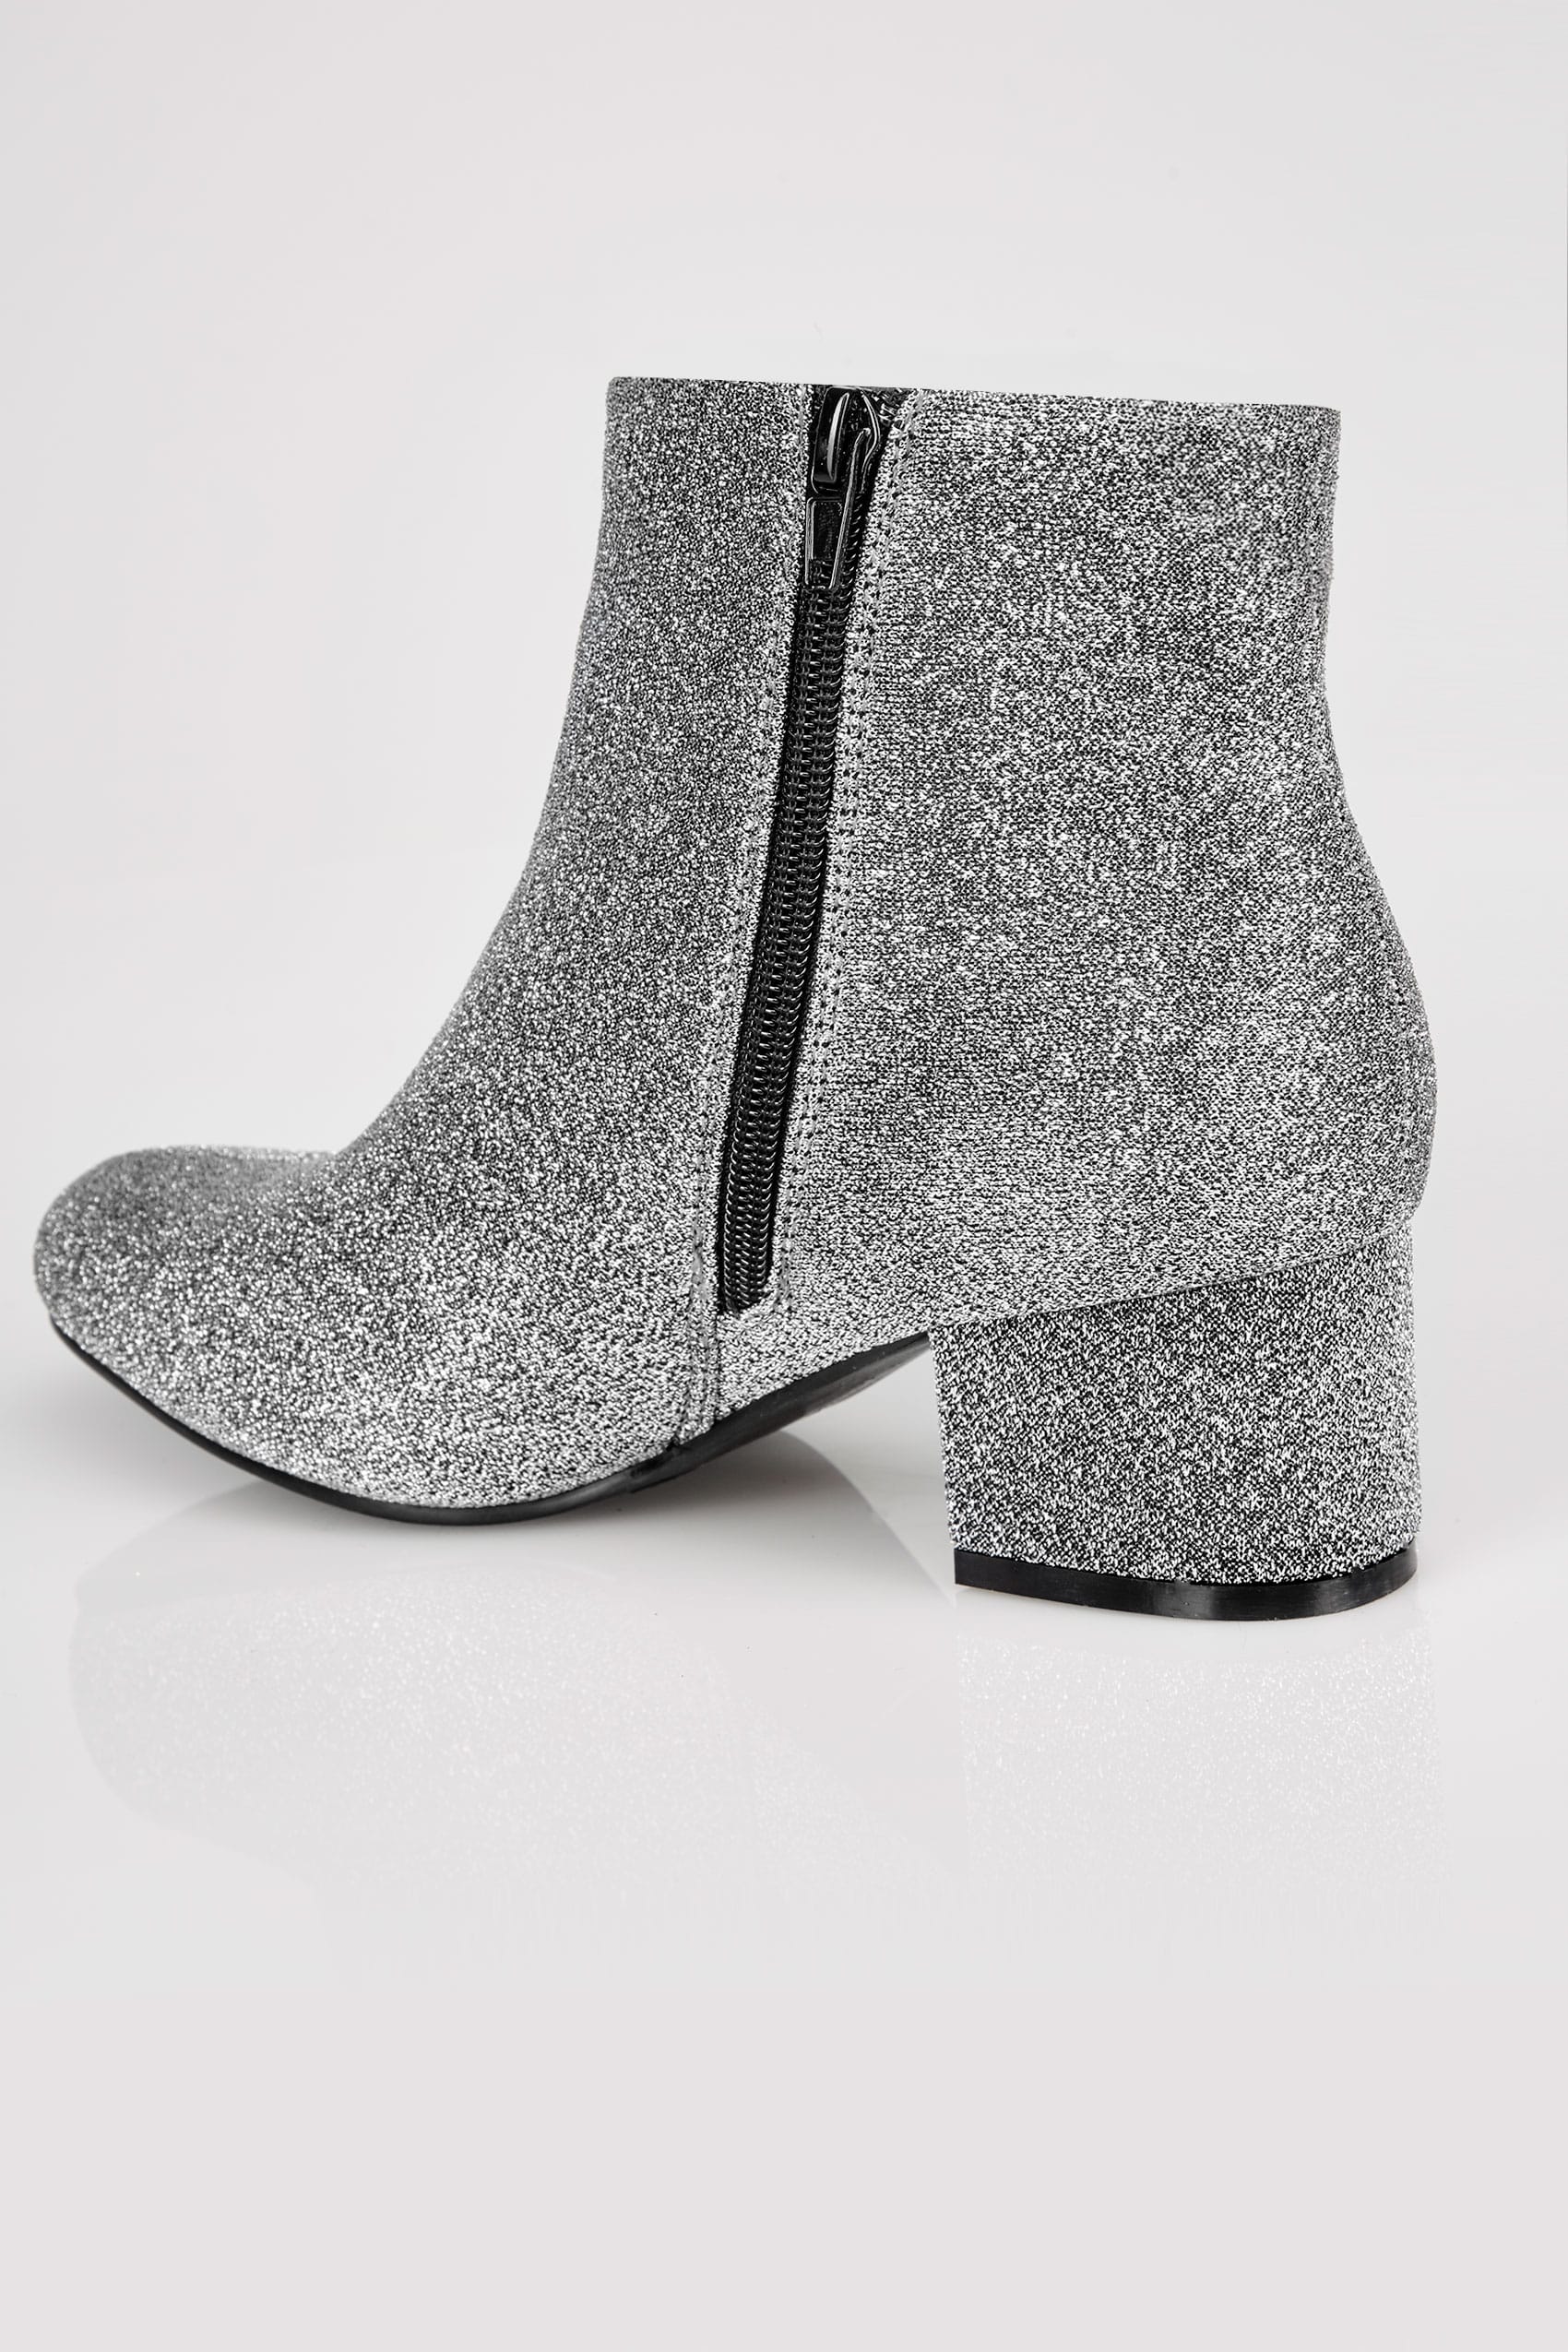 Silver Glitter Boots With Block Heel